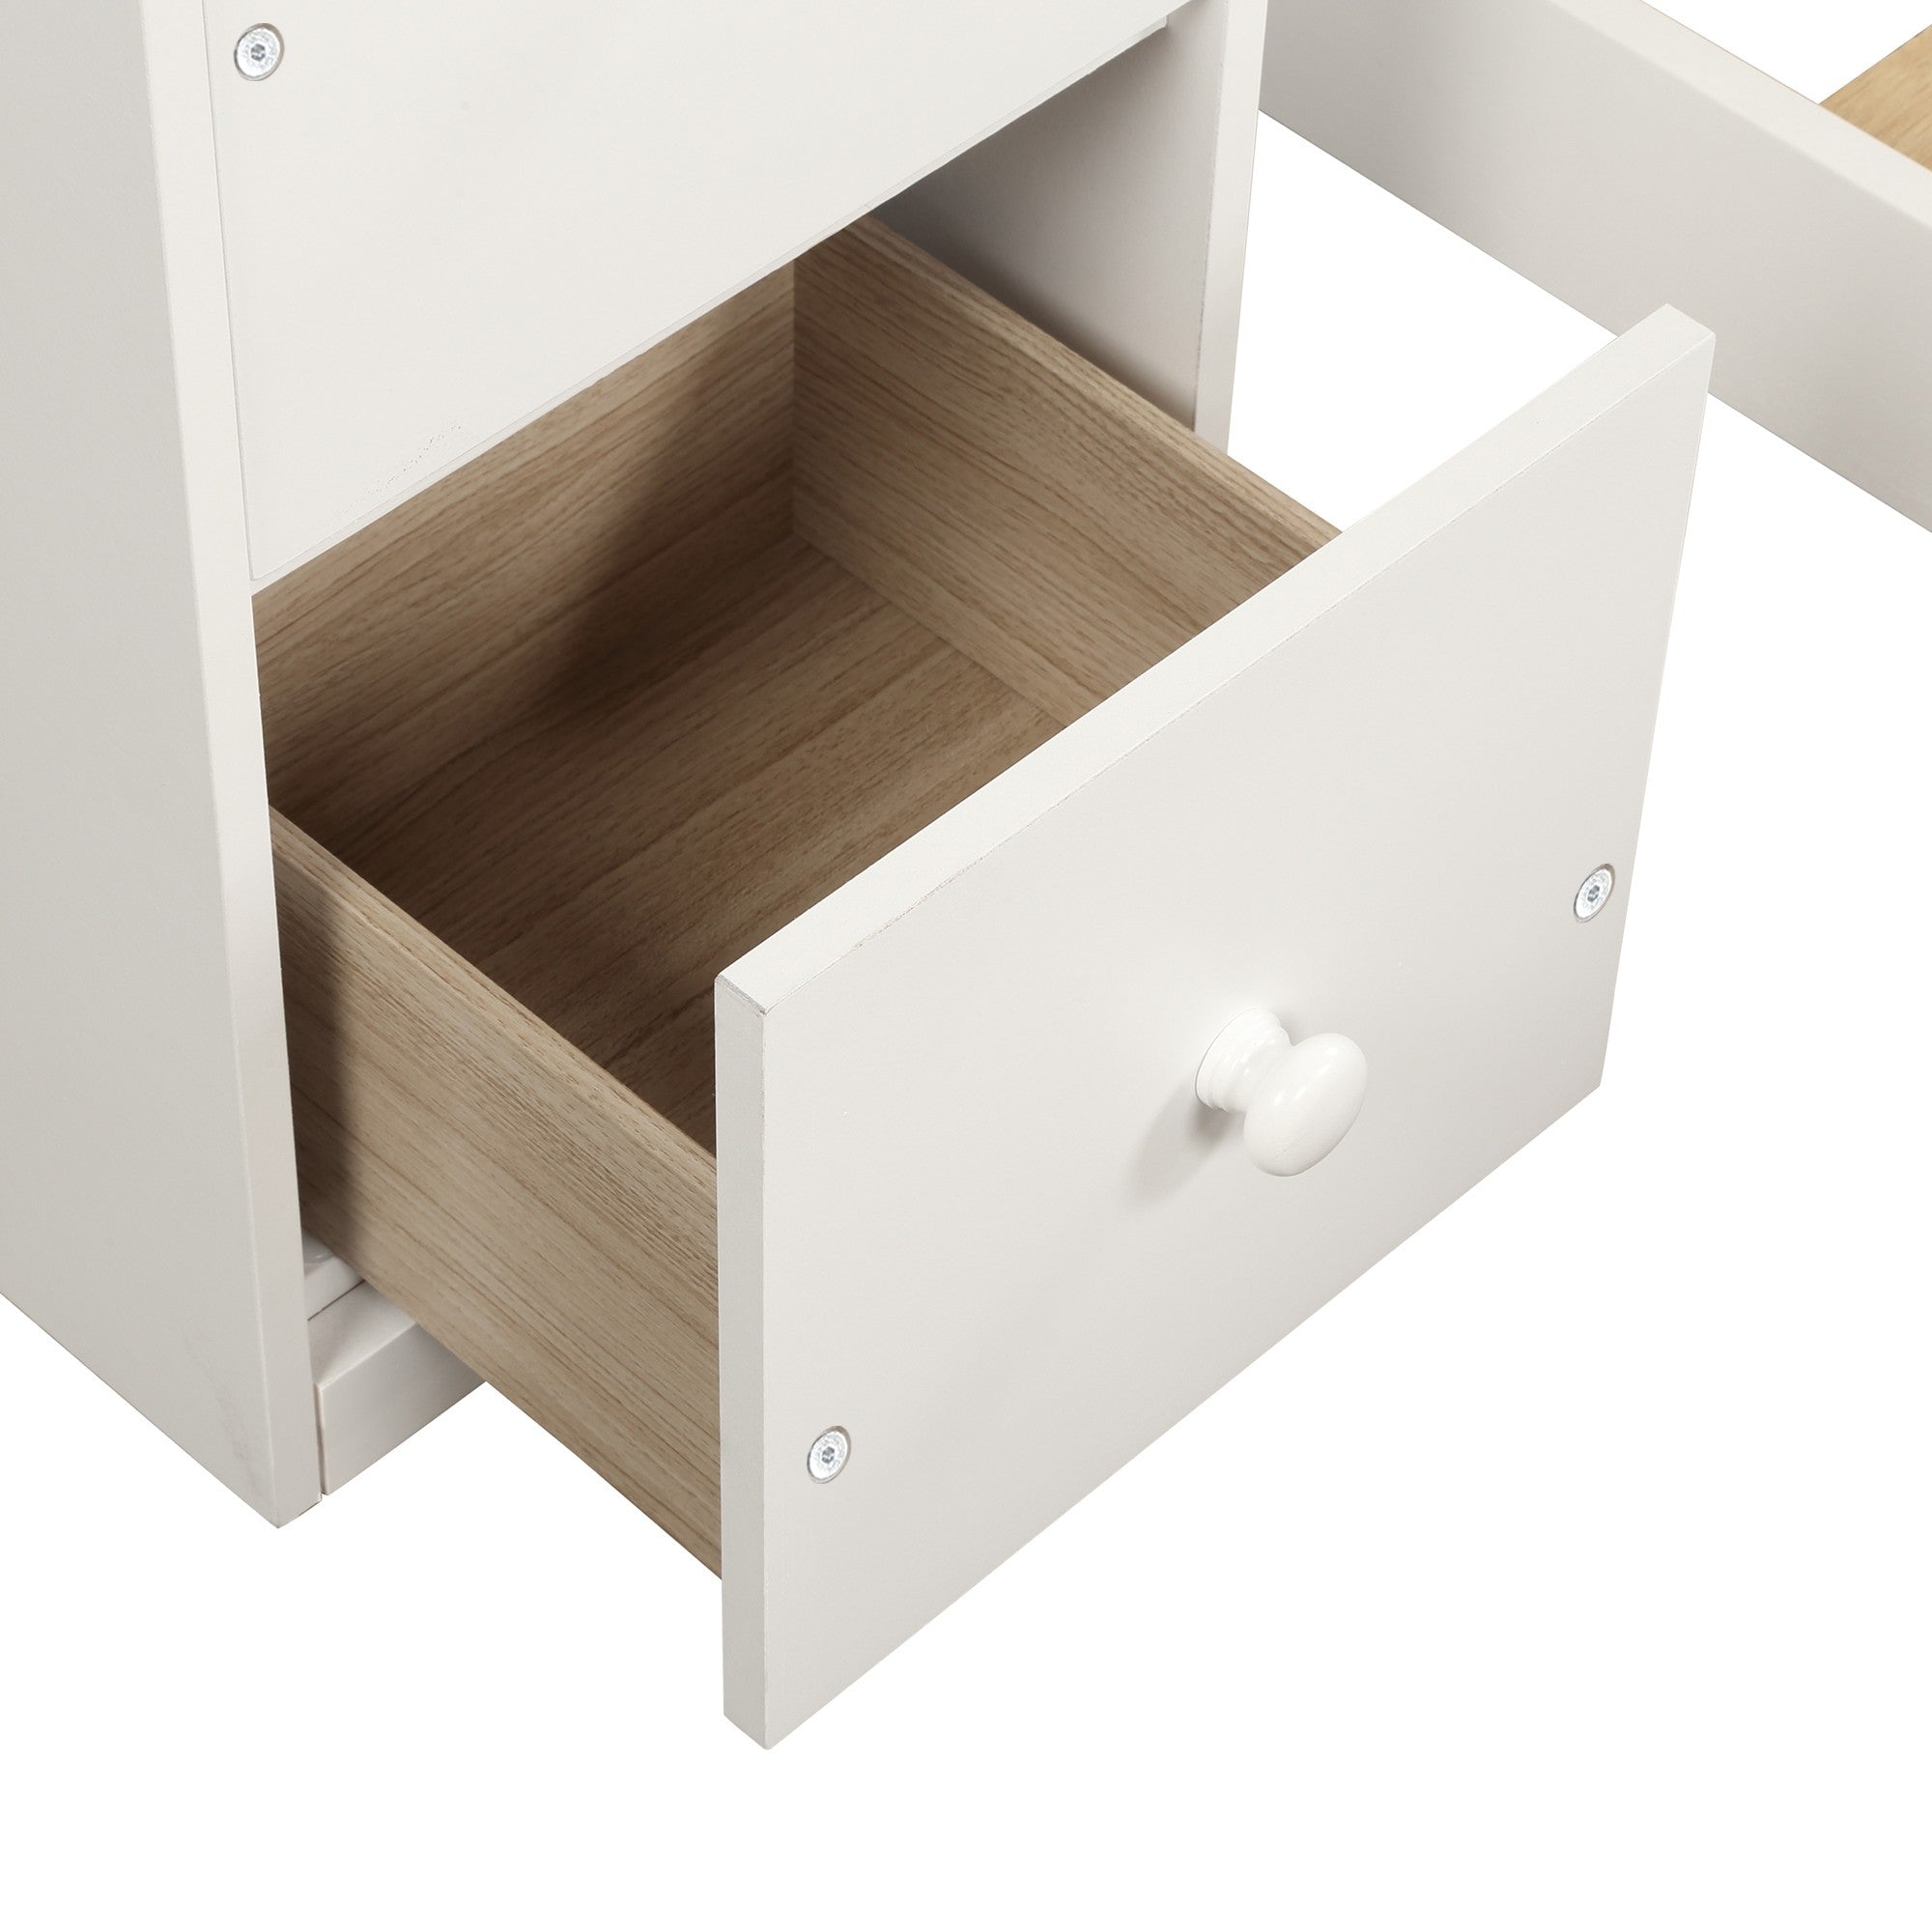 White Twin Over Twin Size Bed with Shelves and Drawers Default Title